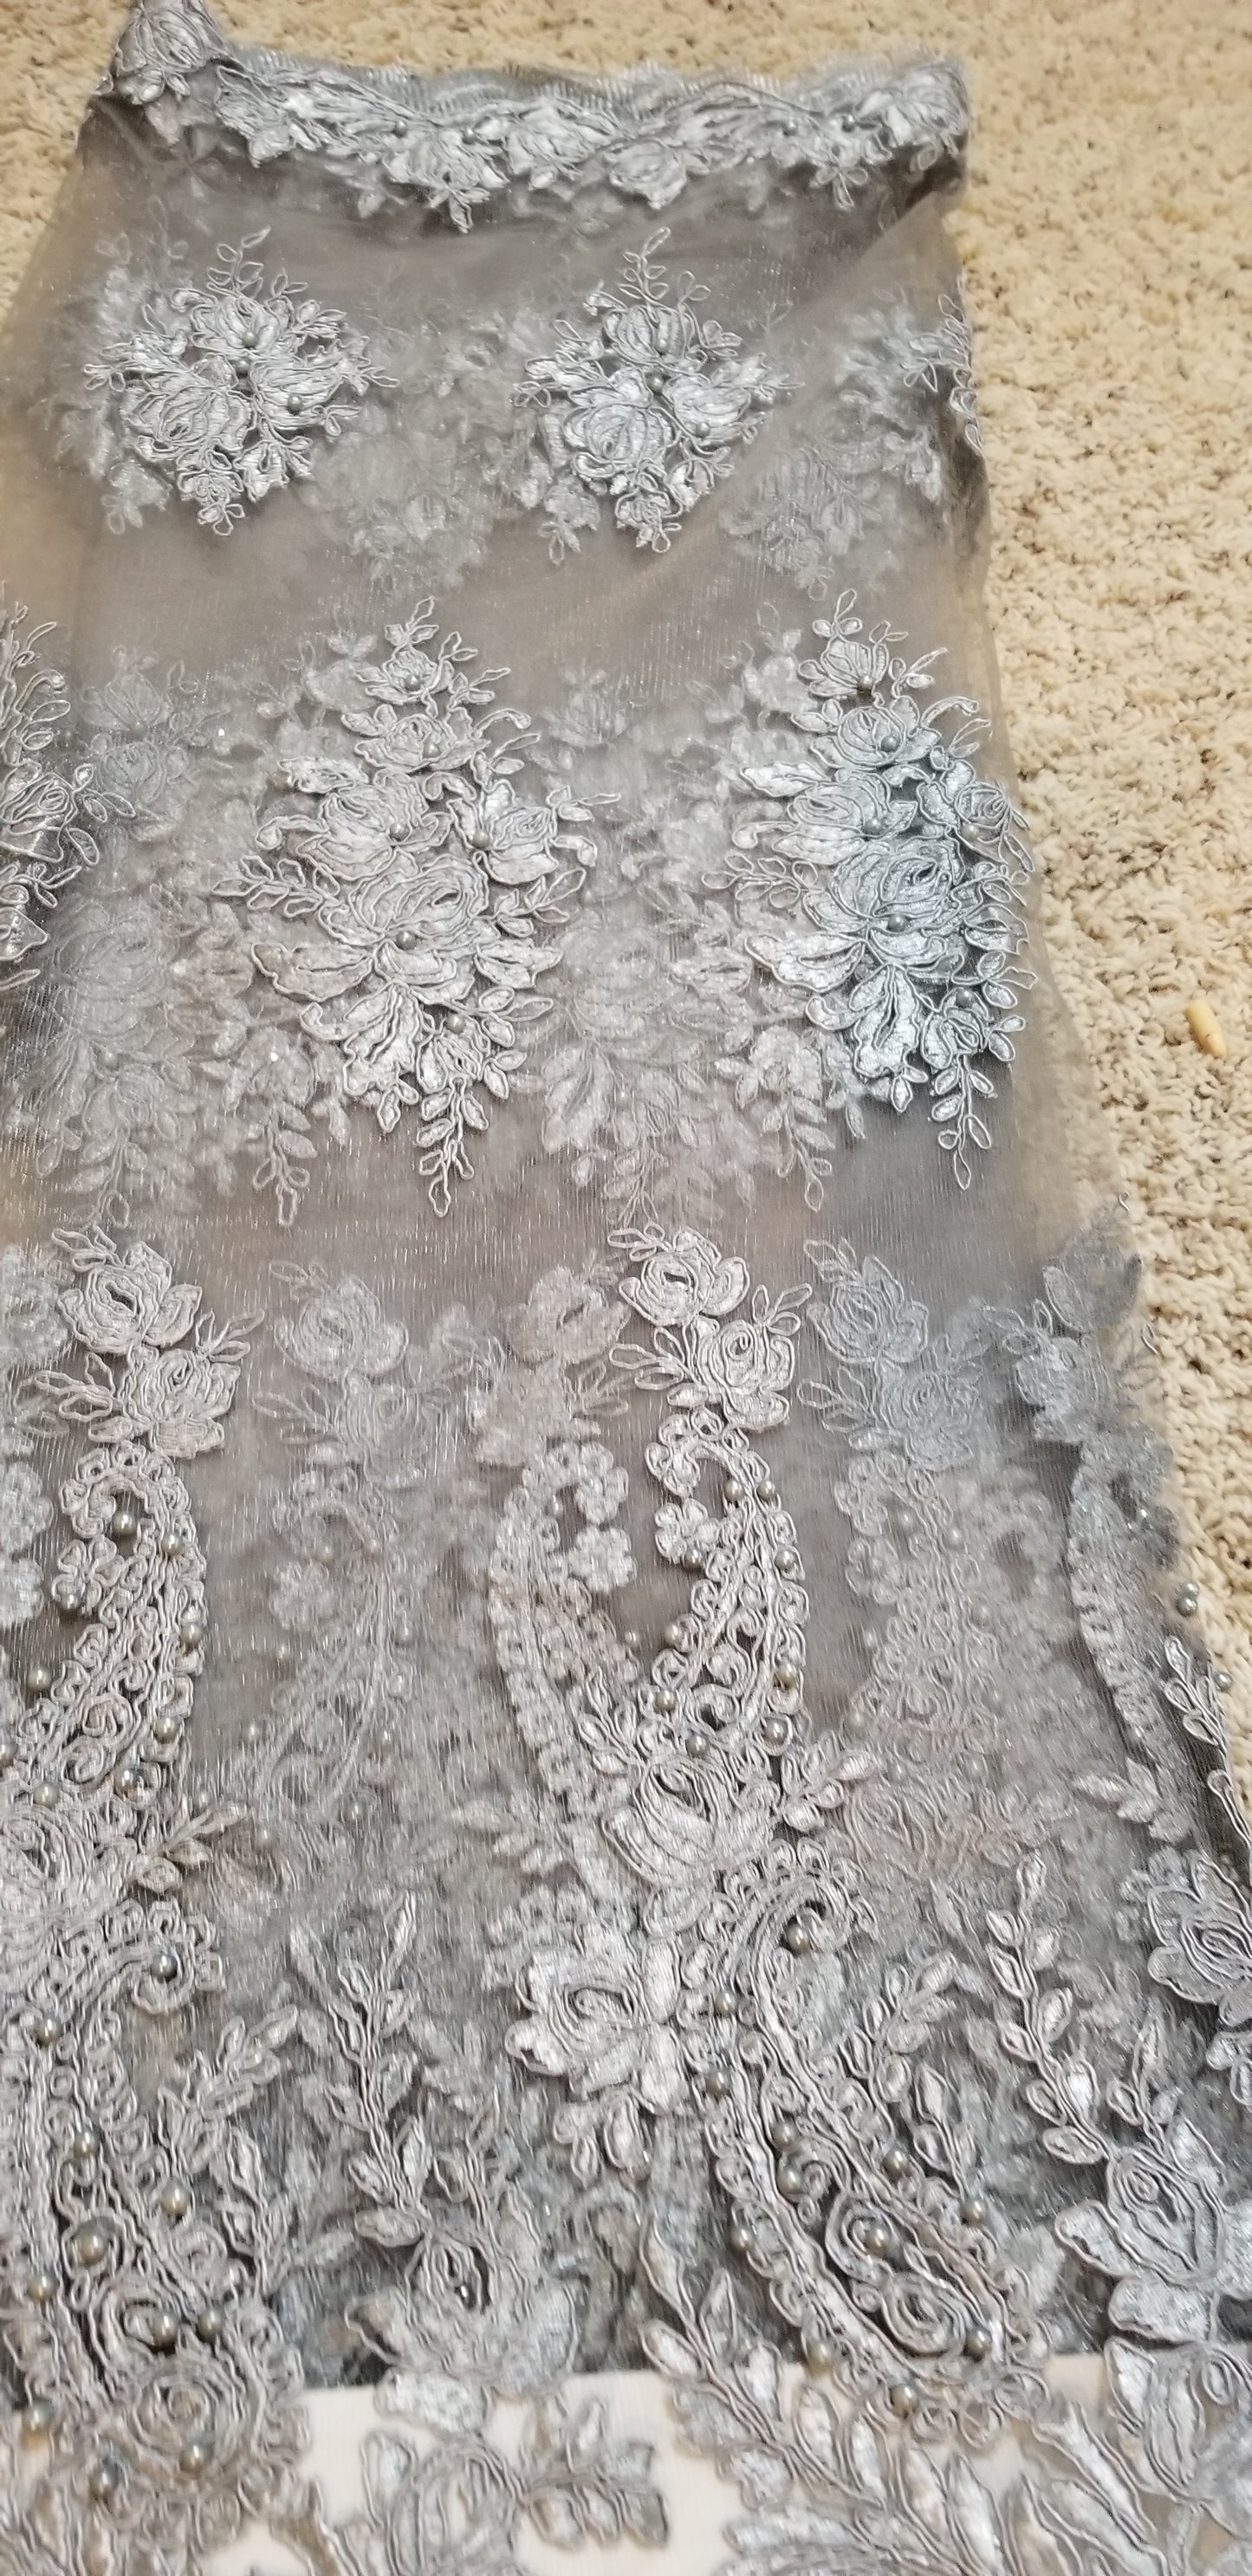 New arrival ash/Gray net French lace. Swiss Quality lace stoned with pearls and crystal. Sold per 5yds. Nigerian french lace fabric. Rich quality for wedding dress